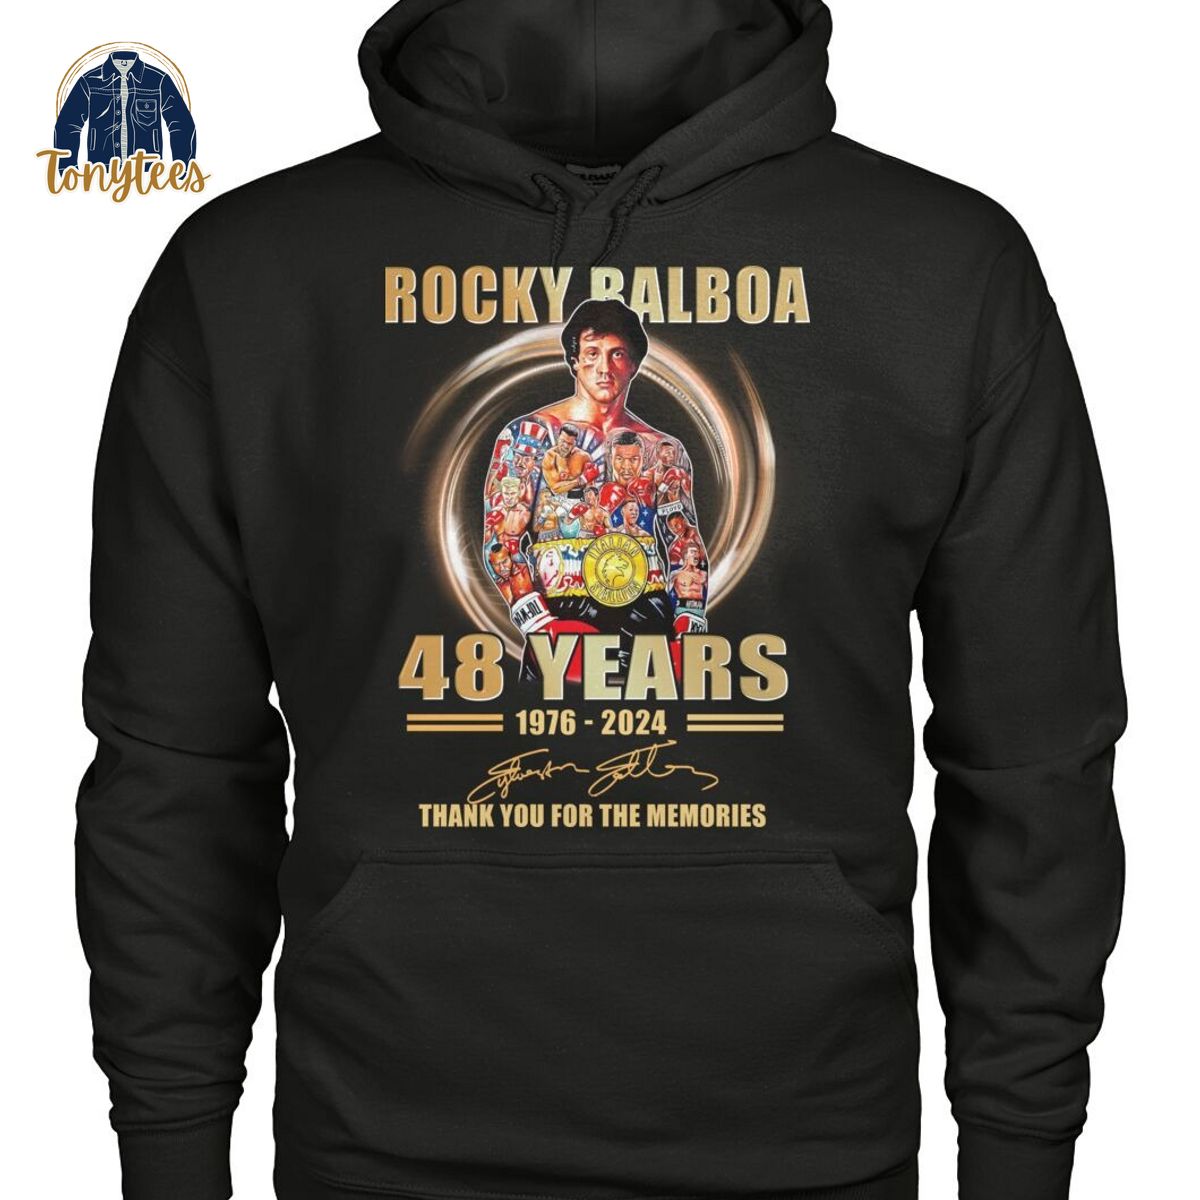 Rocky Raboa 48 years thank you for the memories shirt